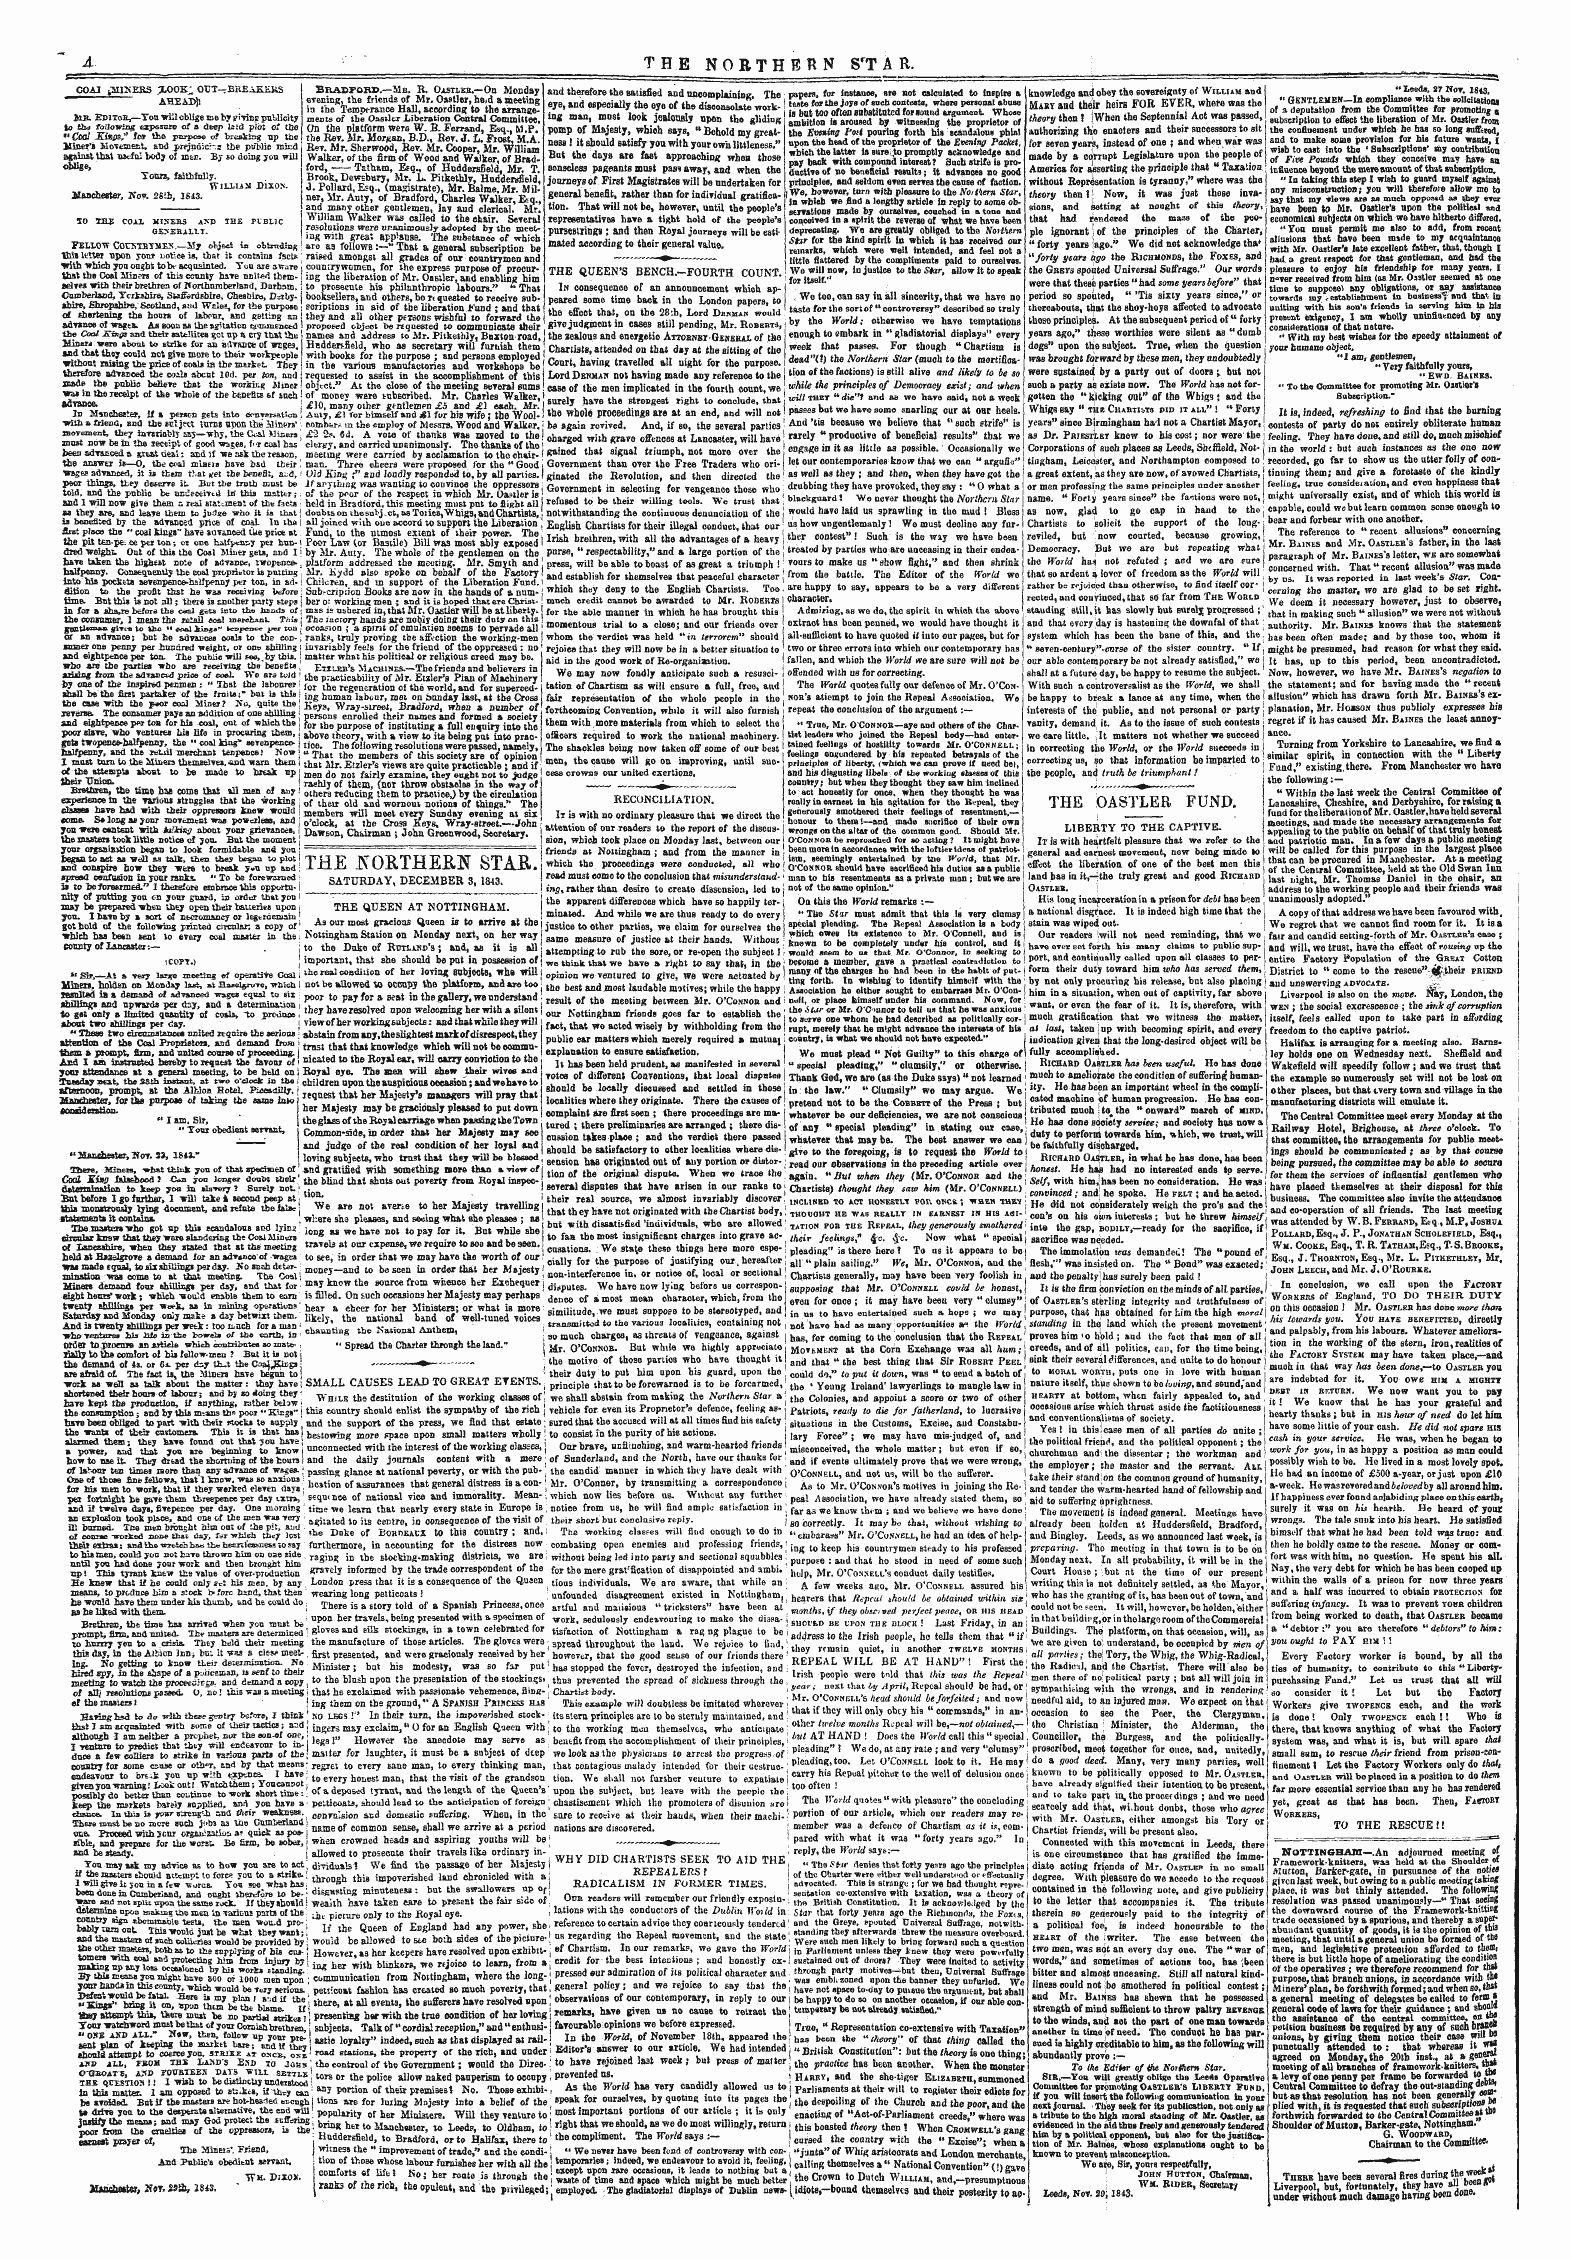 Northern Star 1837 1852 2nd December 1843 Edition 4 Of 5 Page